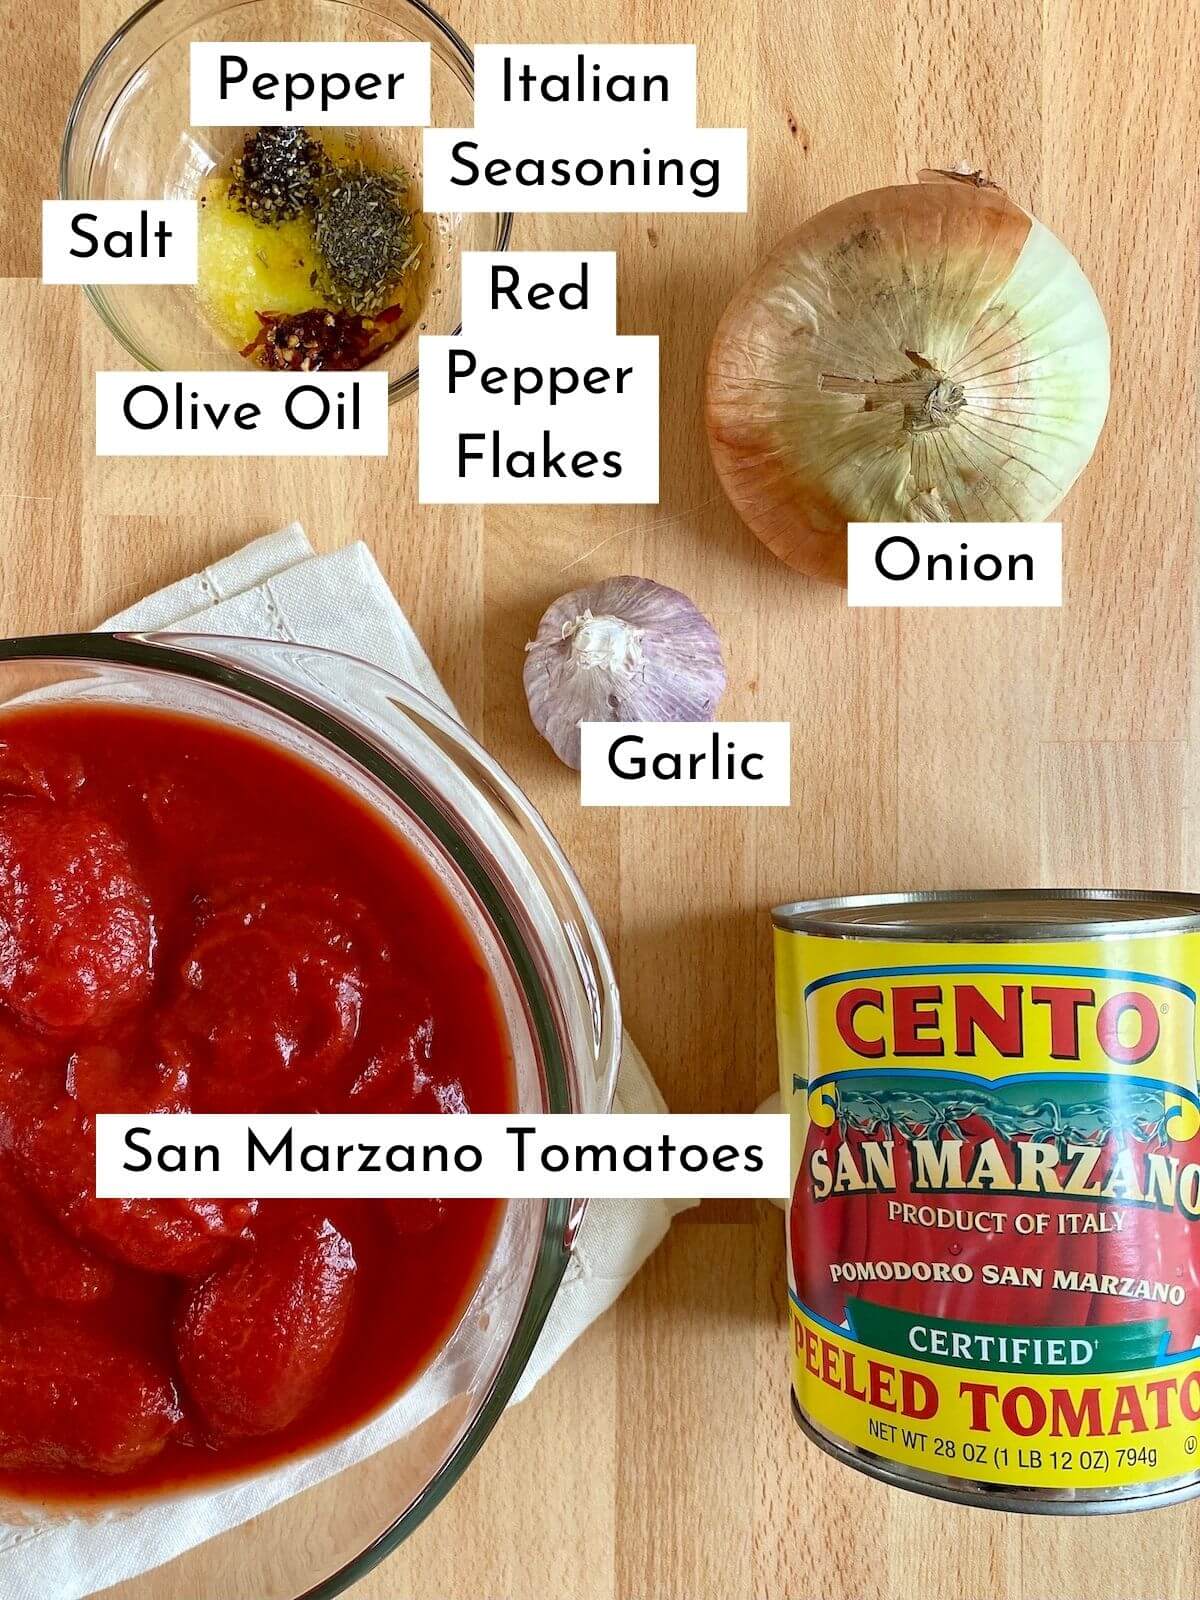 The ingredients to make San Marzano tomato sauce displayed on a butcher block countertop. There is text over each ingredient, stating what it is. The ingredients include San Marzano tomatoes, garlic, onion, olive oil, Italian seasoning, red pepper flakes, salt, and pepper.